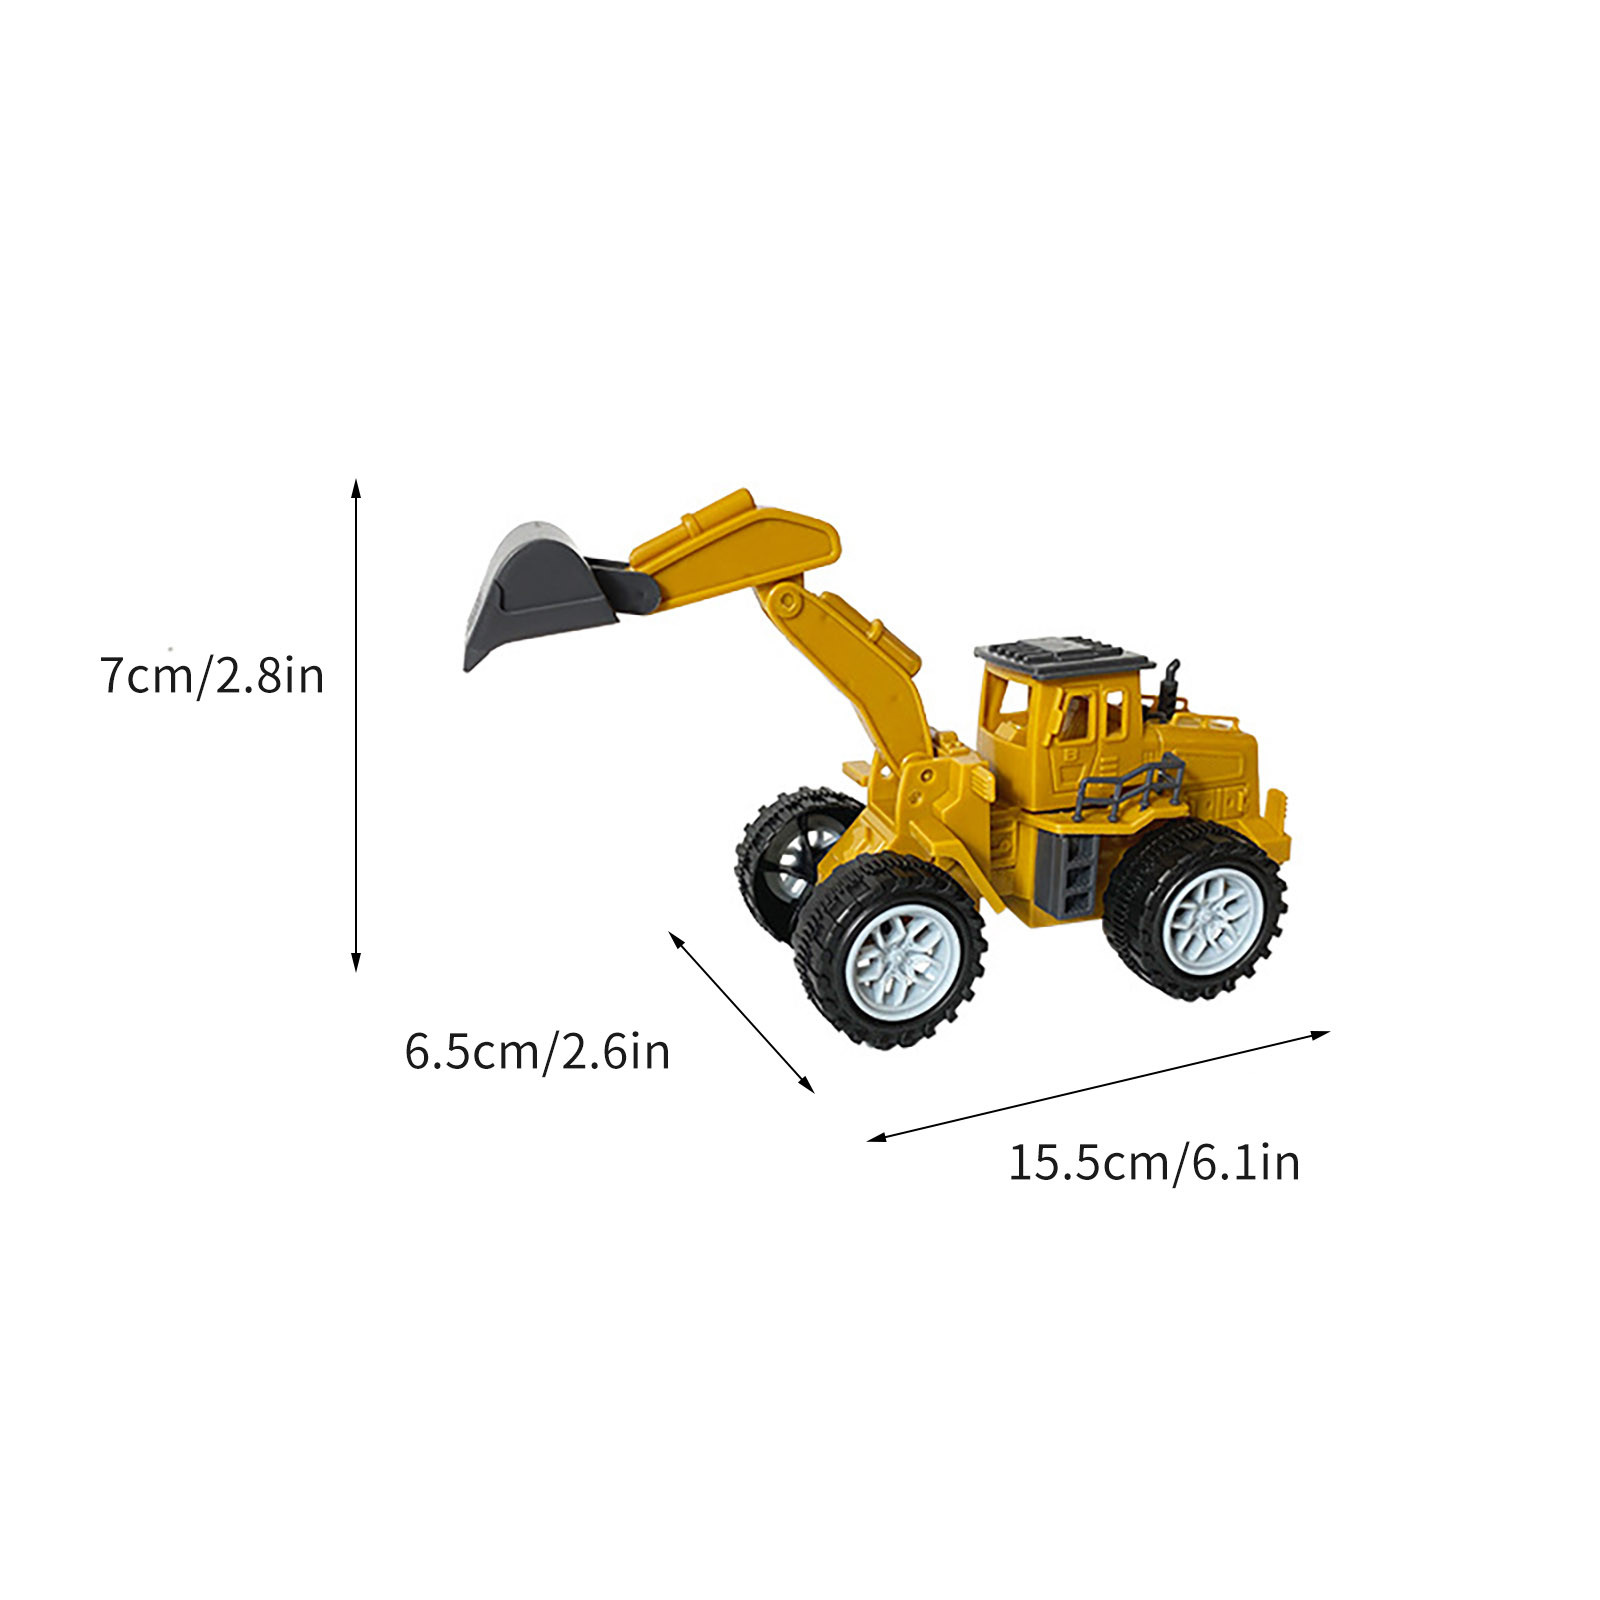 Kayannuo Clearance Mini Engineering Alloy Car Tractor Diecasts Vehicle Toy Dump Truck Model Classic Toy - image 2 of 6